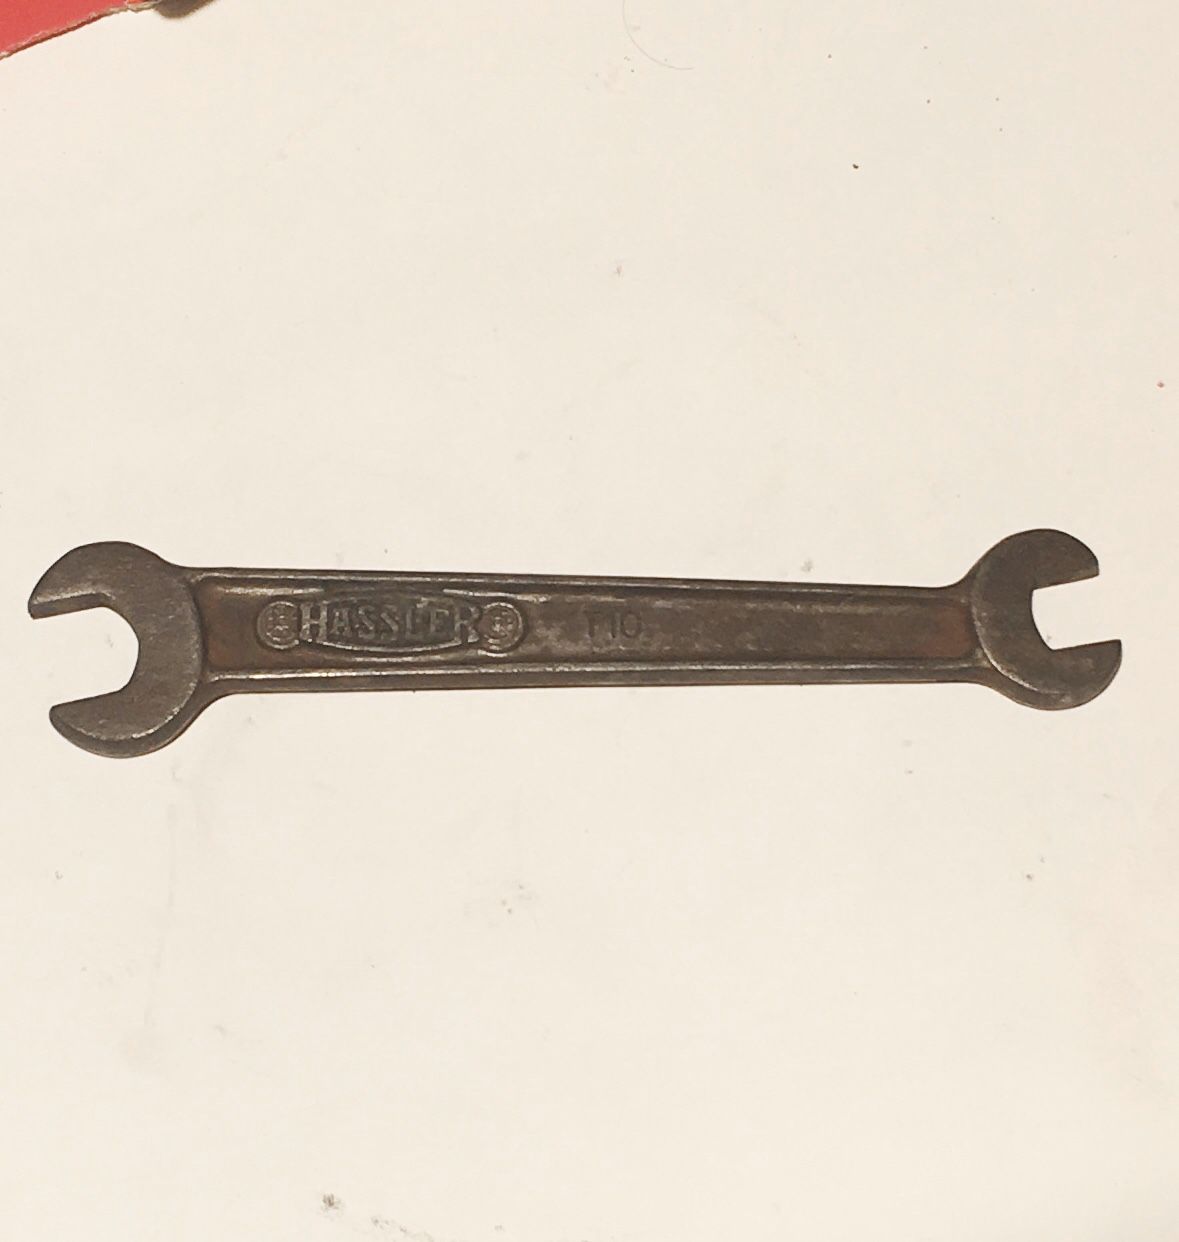 Hassler T10 Model T Wrench